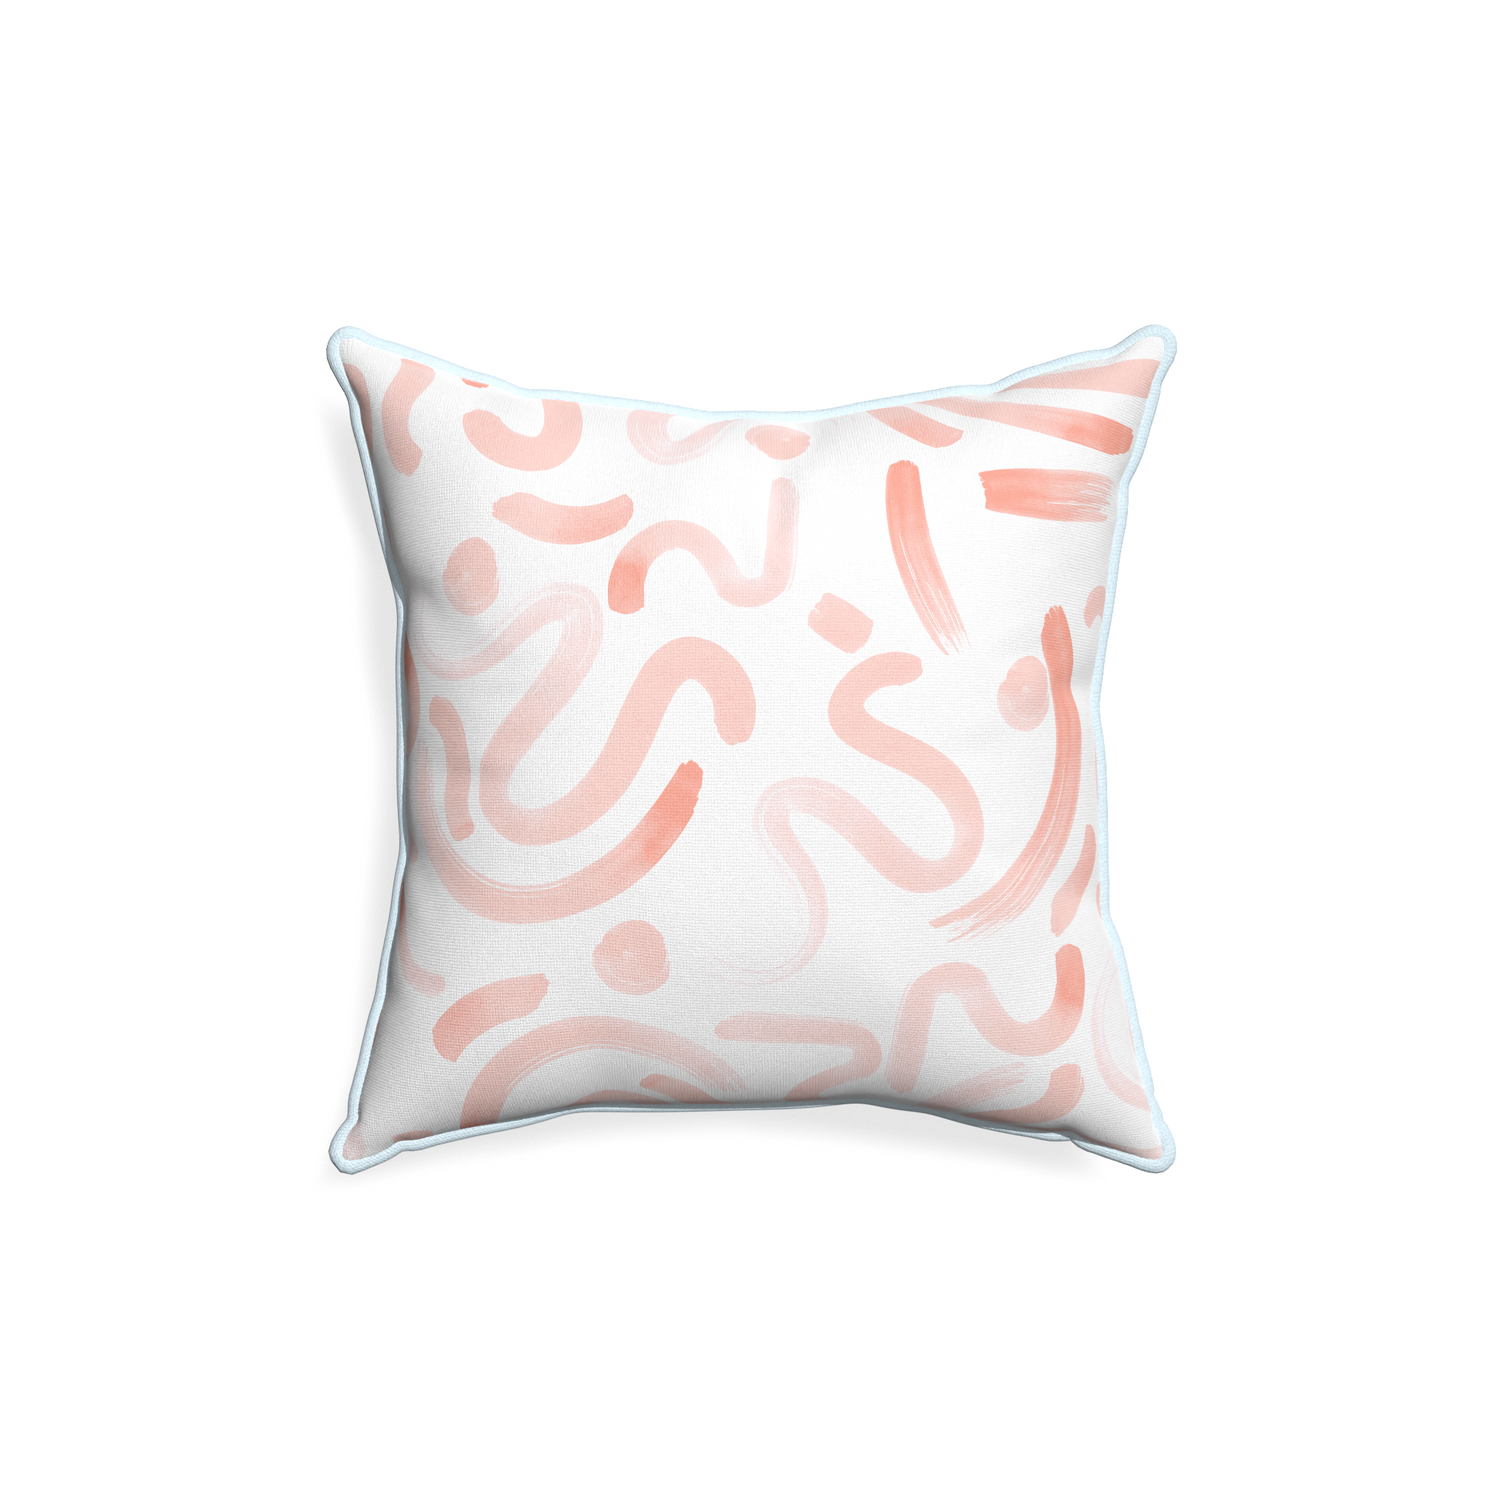 18-square hockney pink custom pillow with powder piping on white background